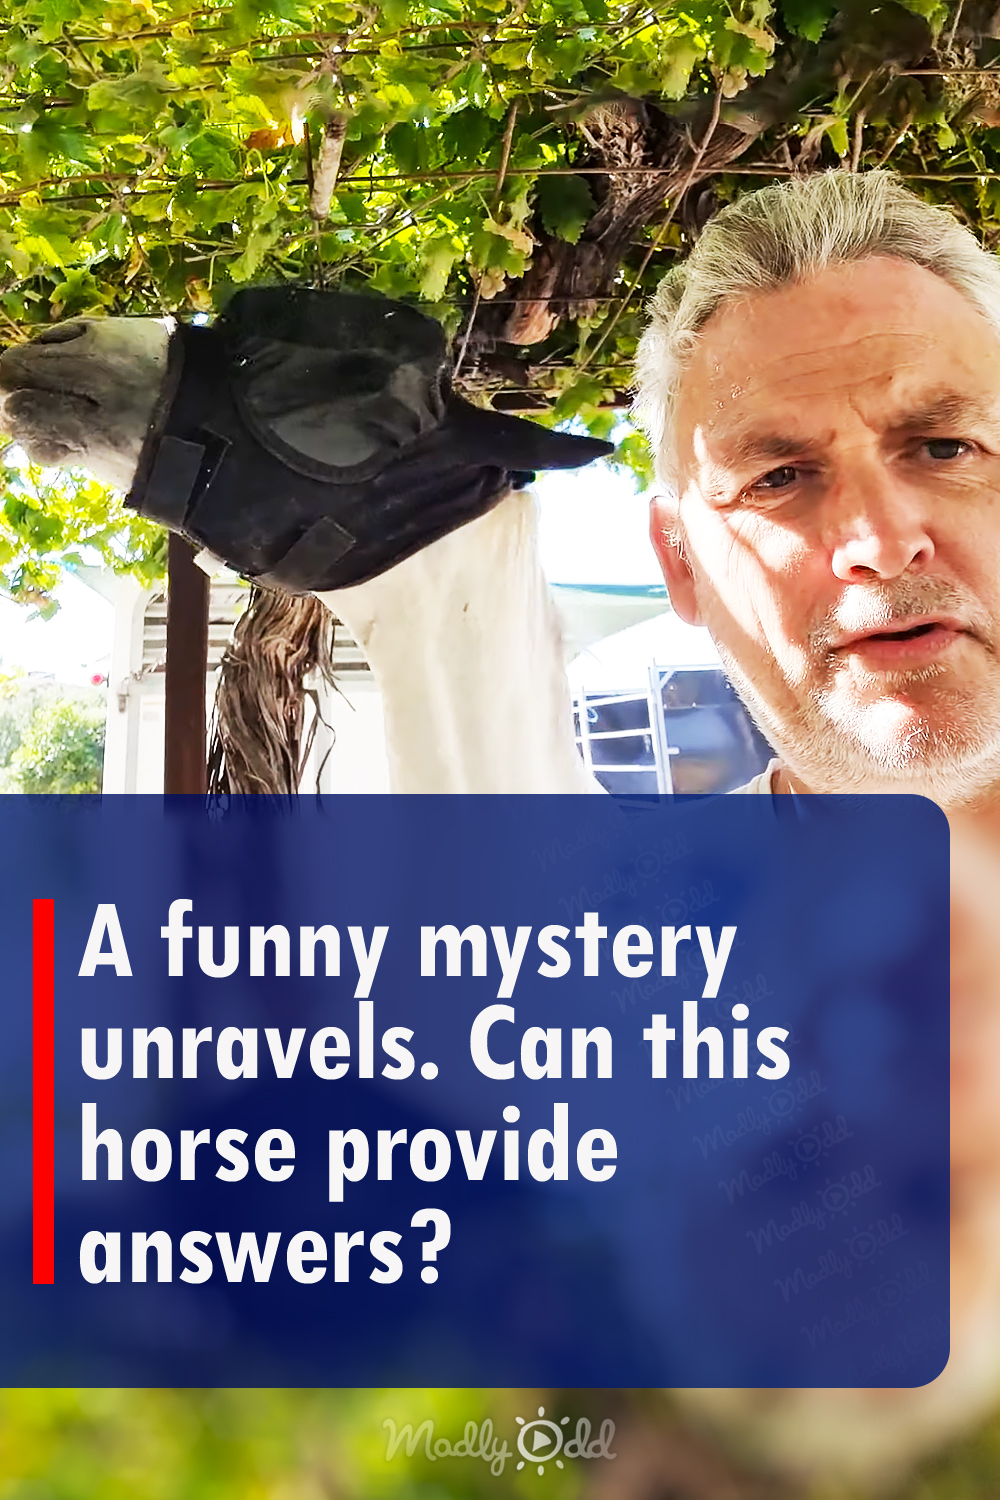 A funny mystery unravels. Can this horse provide answers?